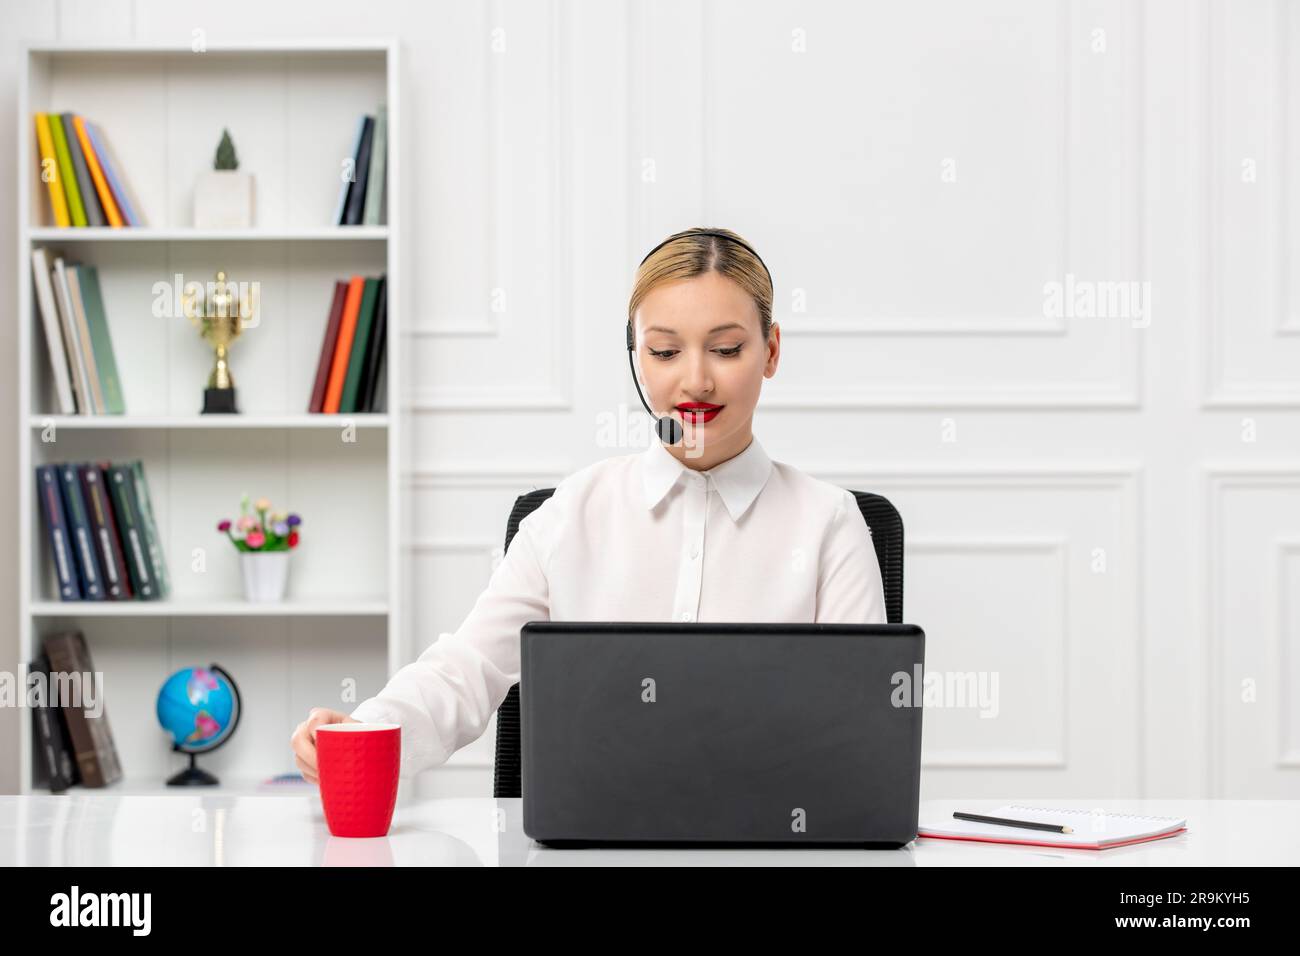 customer service cute blonde girl office shirt with headset and computer holding a red cup Stock Photo